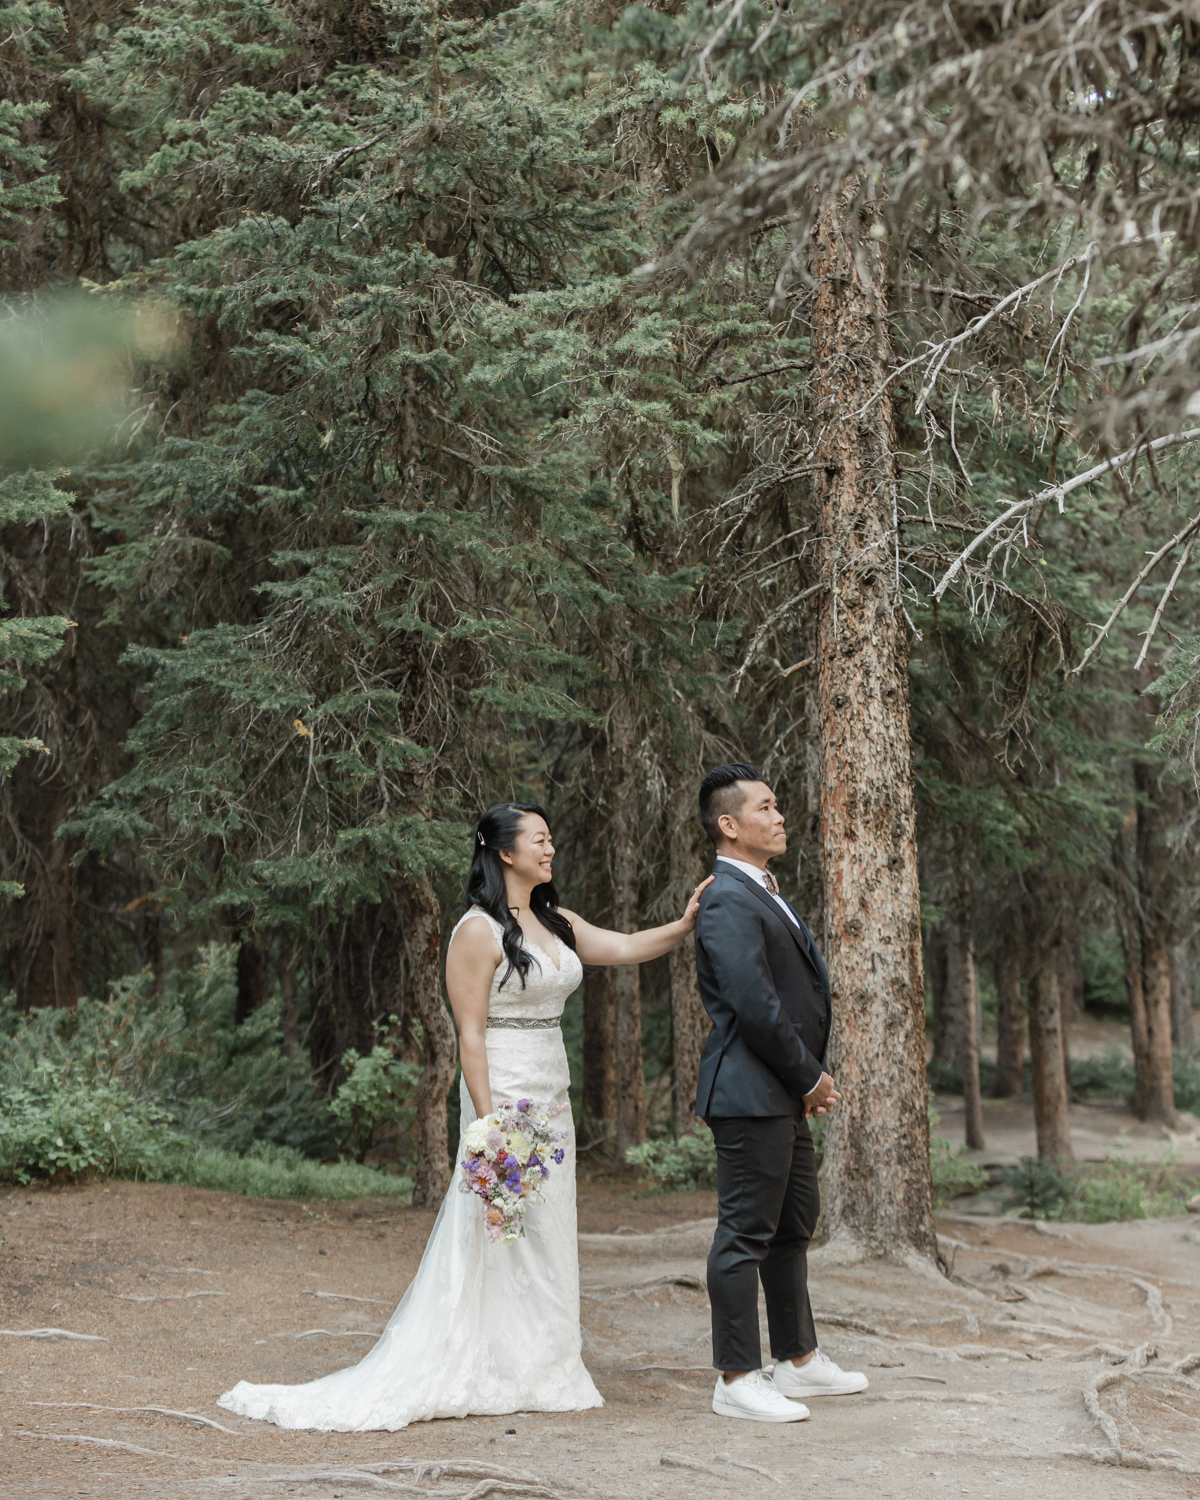 Reveal Elopement in Banff National Park in the forest